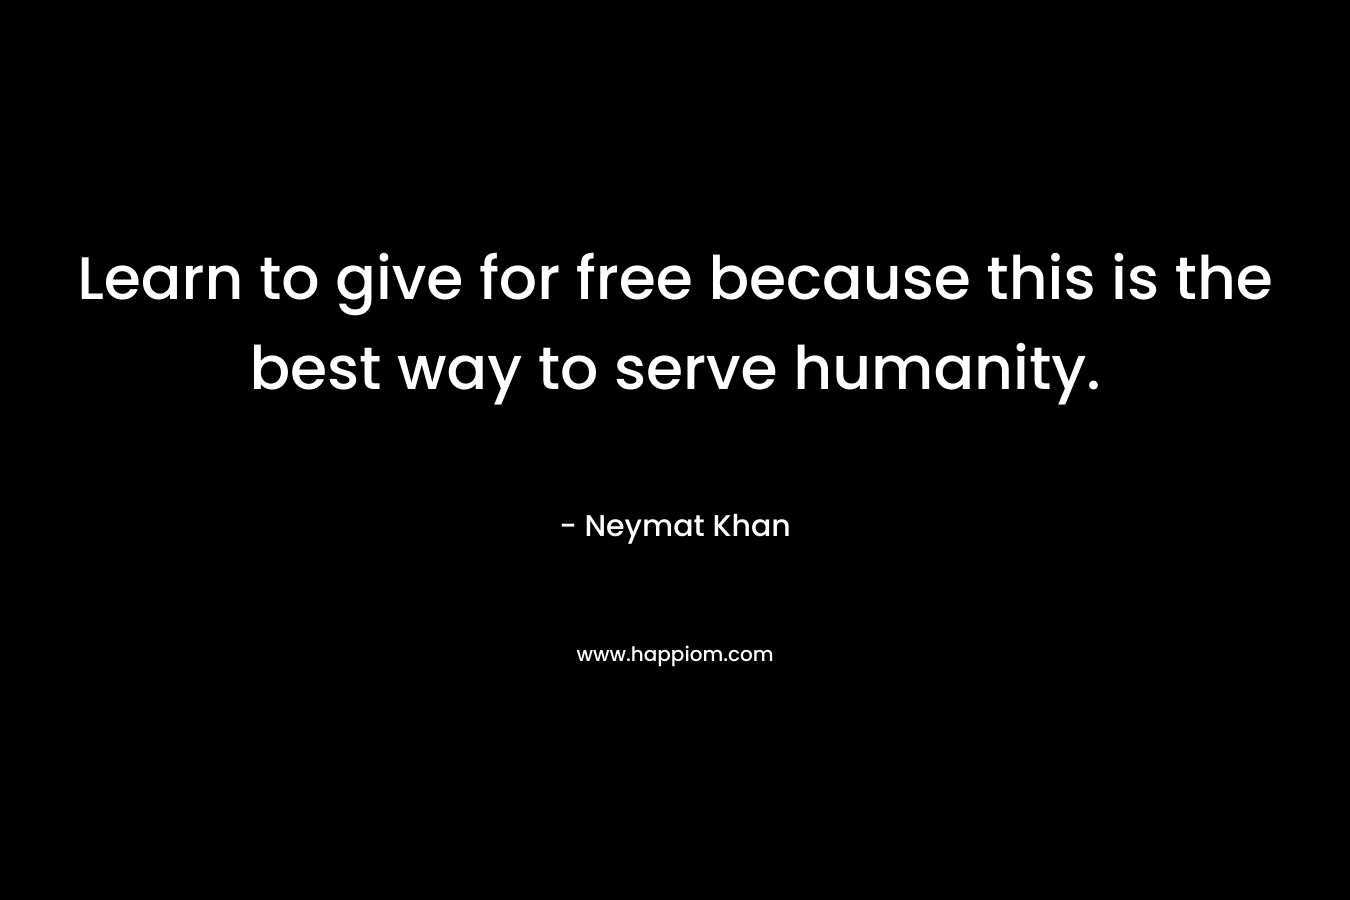 Learn to give for free because this is the best way to serve humanity. – Neymat Khan